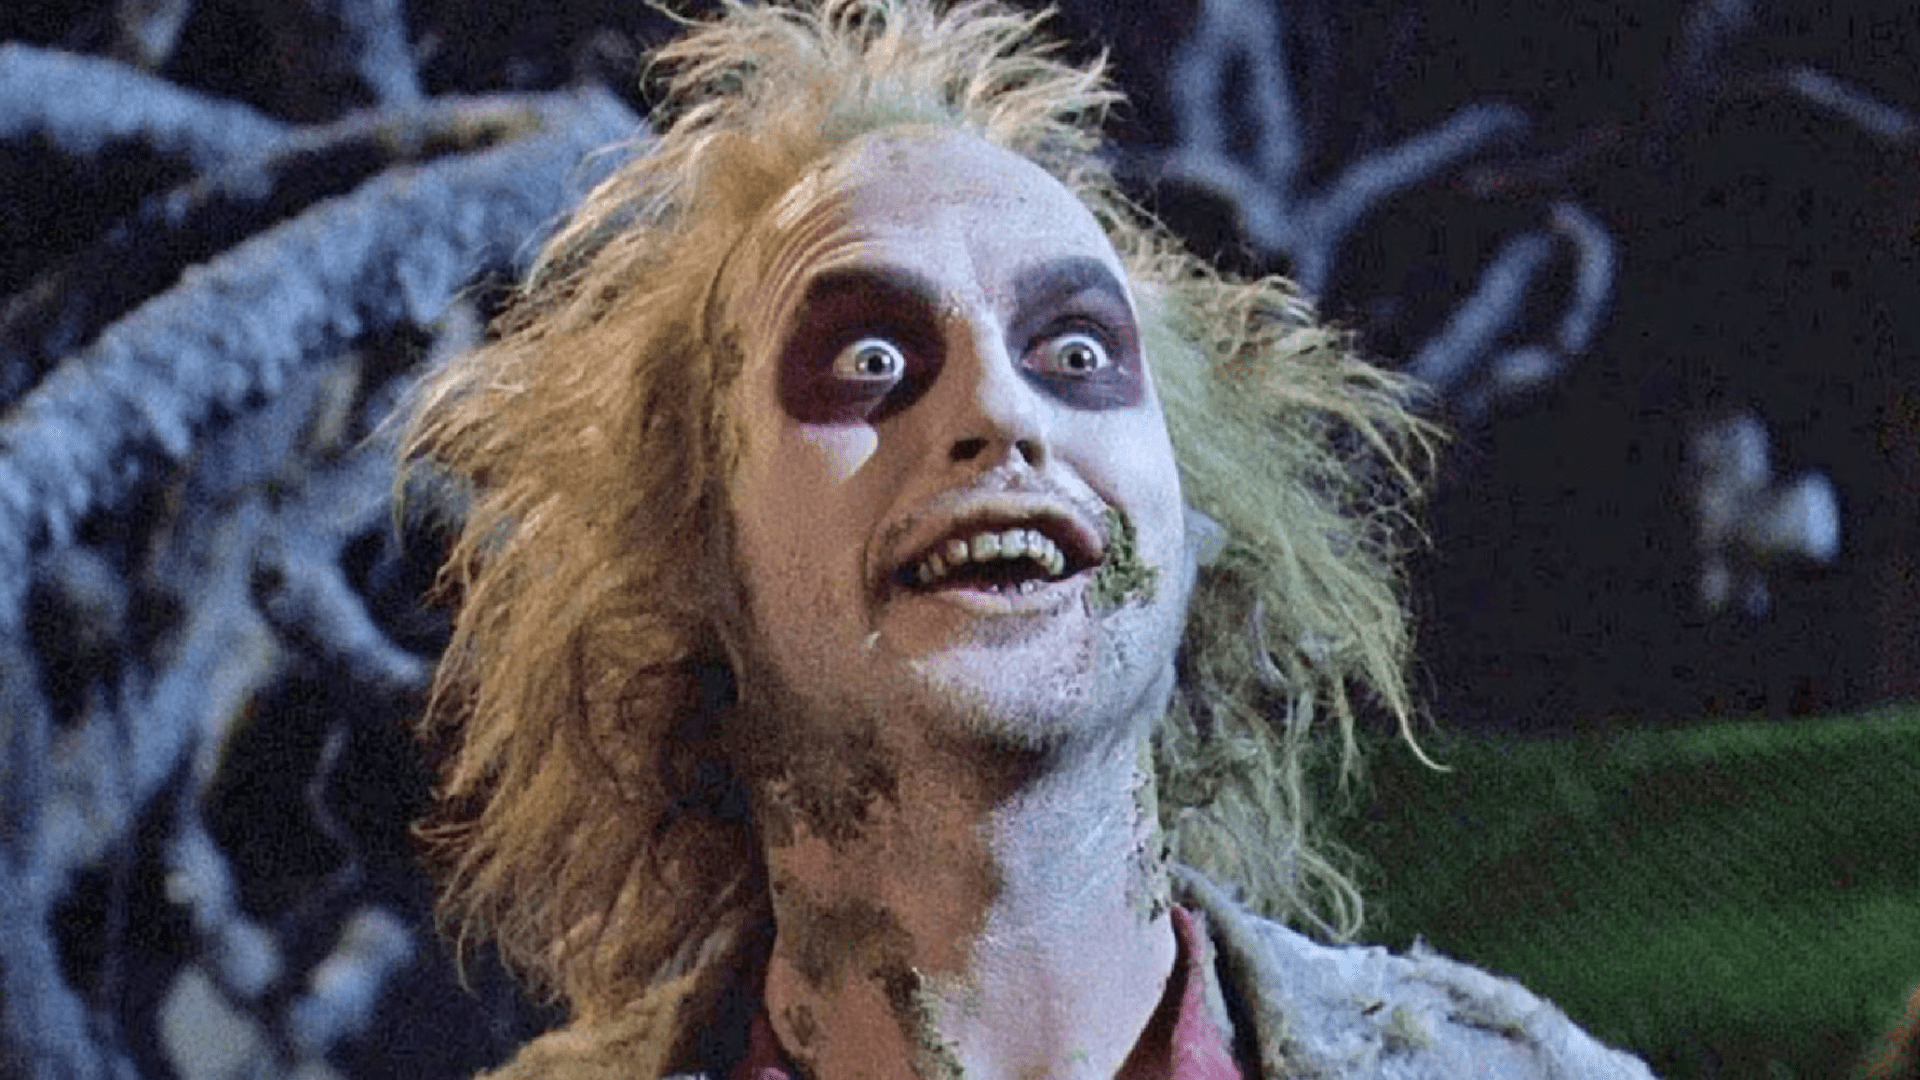 Beetlejuice (1988) Quotes From Tim Burton's Classic Film - Beetlejuice (1988) Quotes